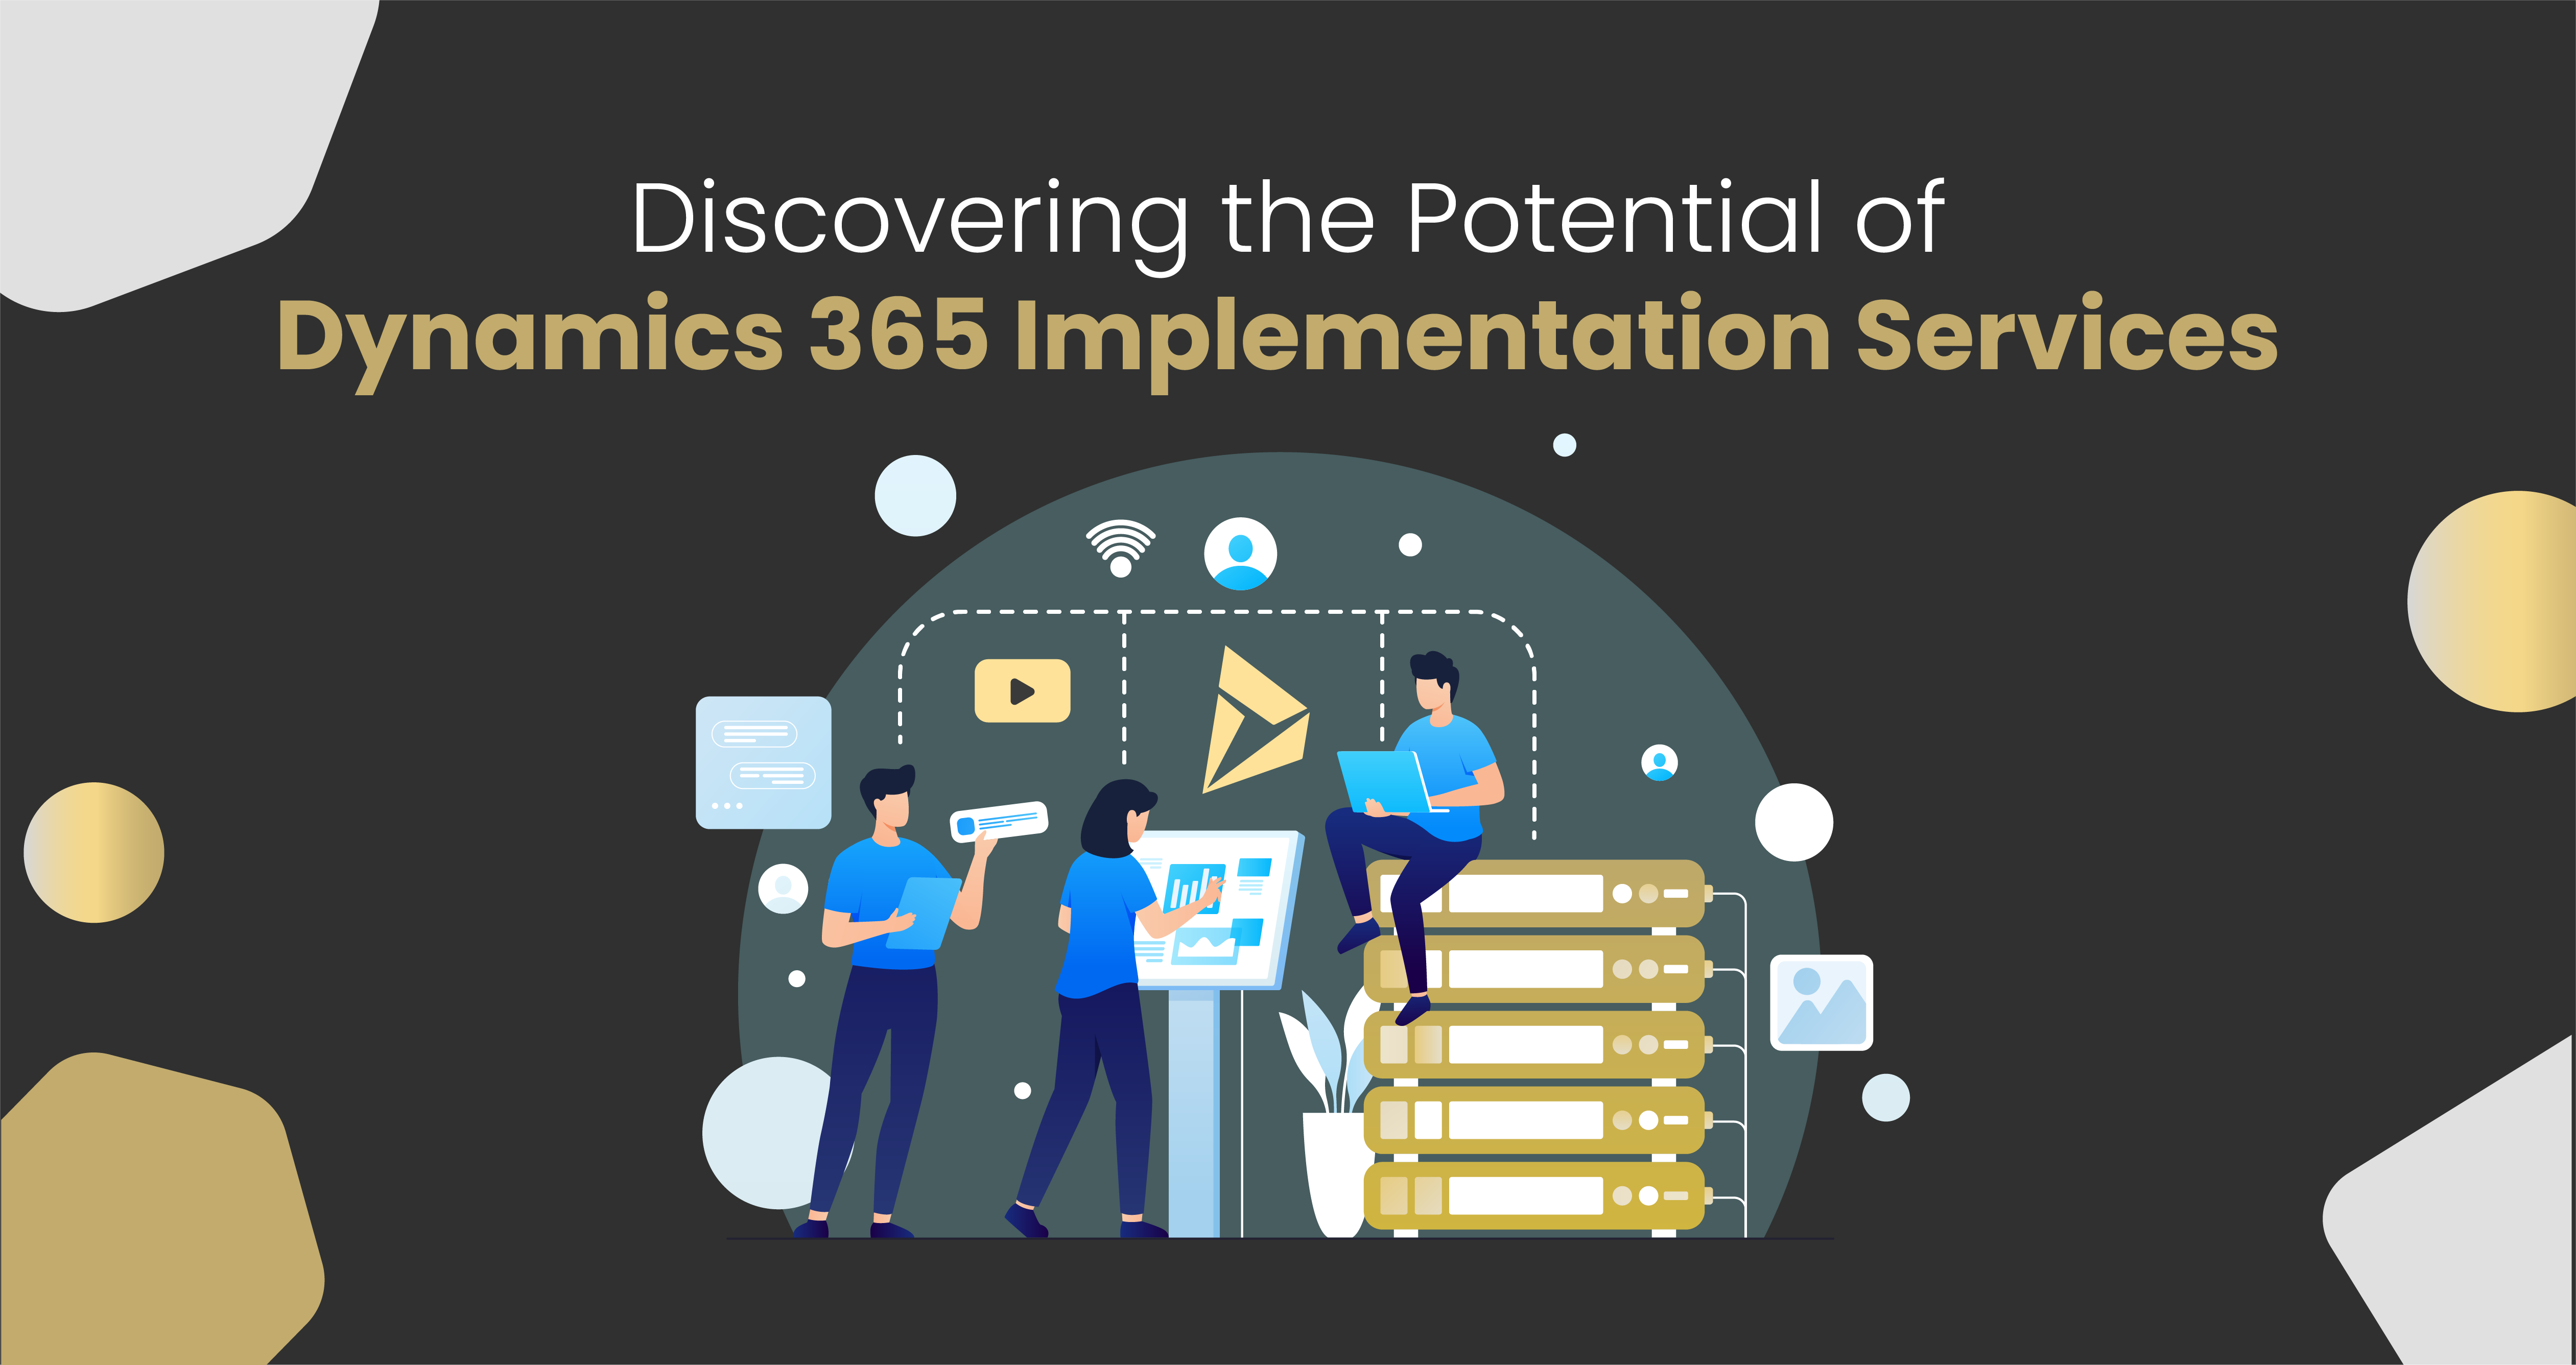 Discovering the Potential of Dynamics 365 Implementation Services